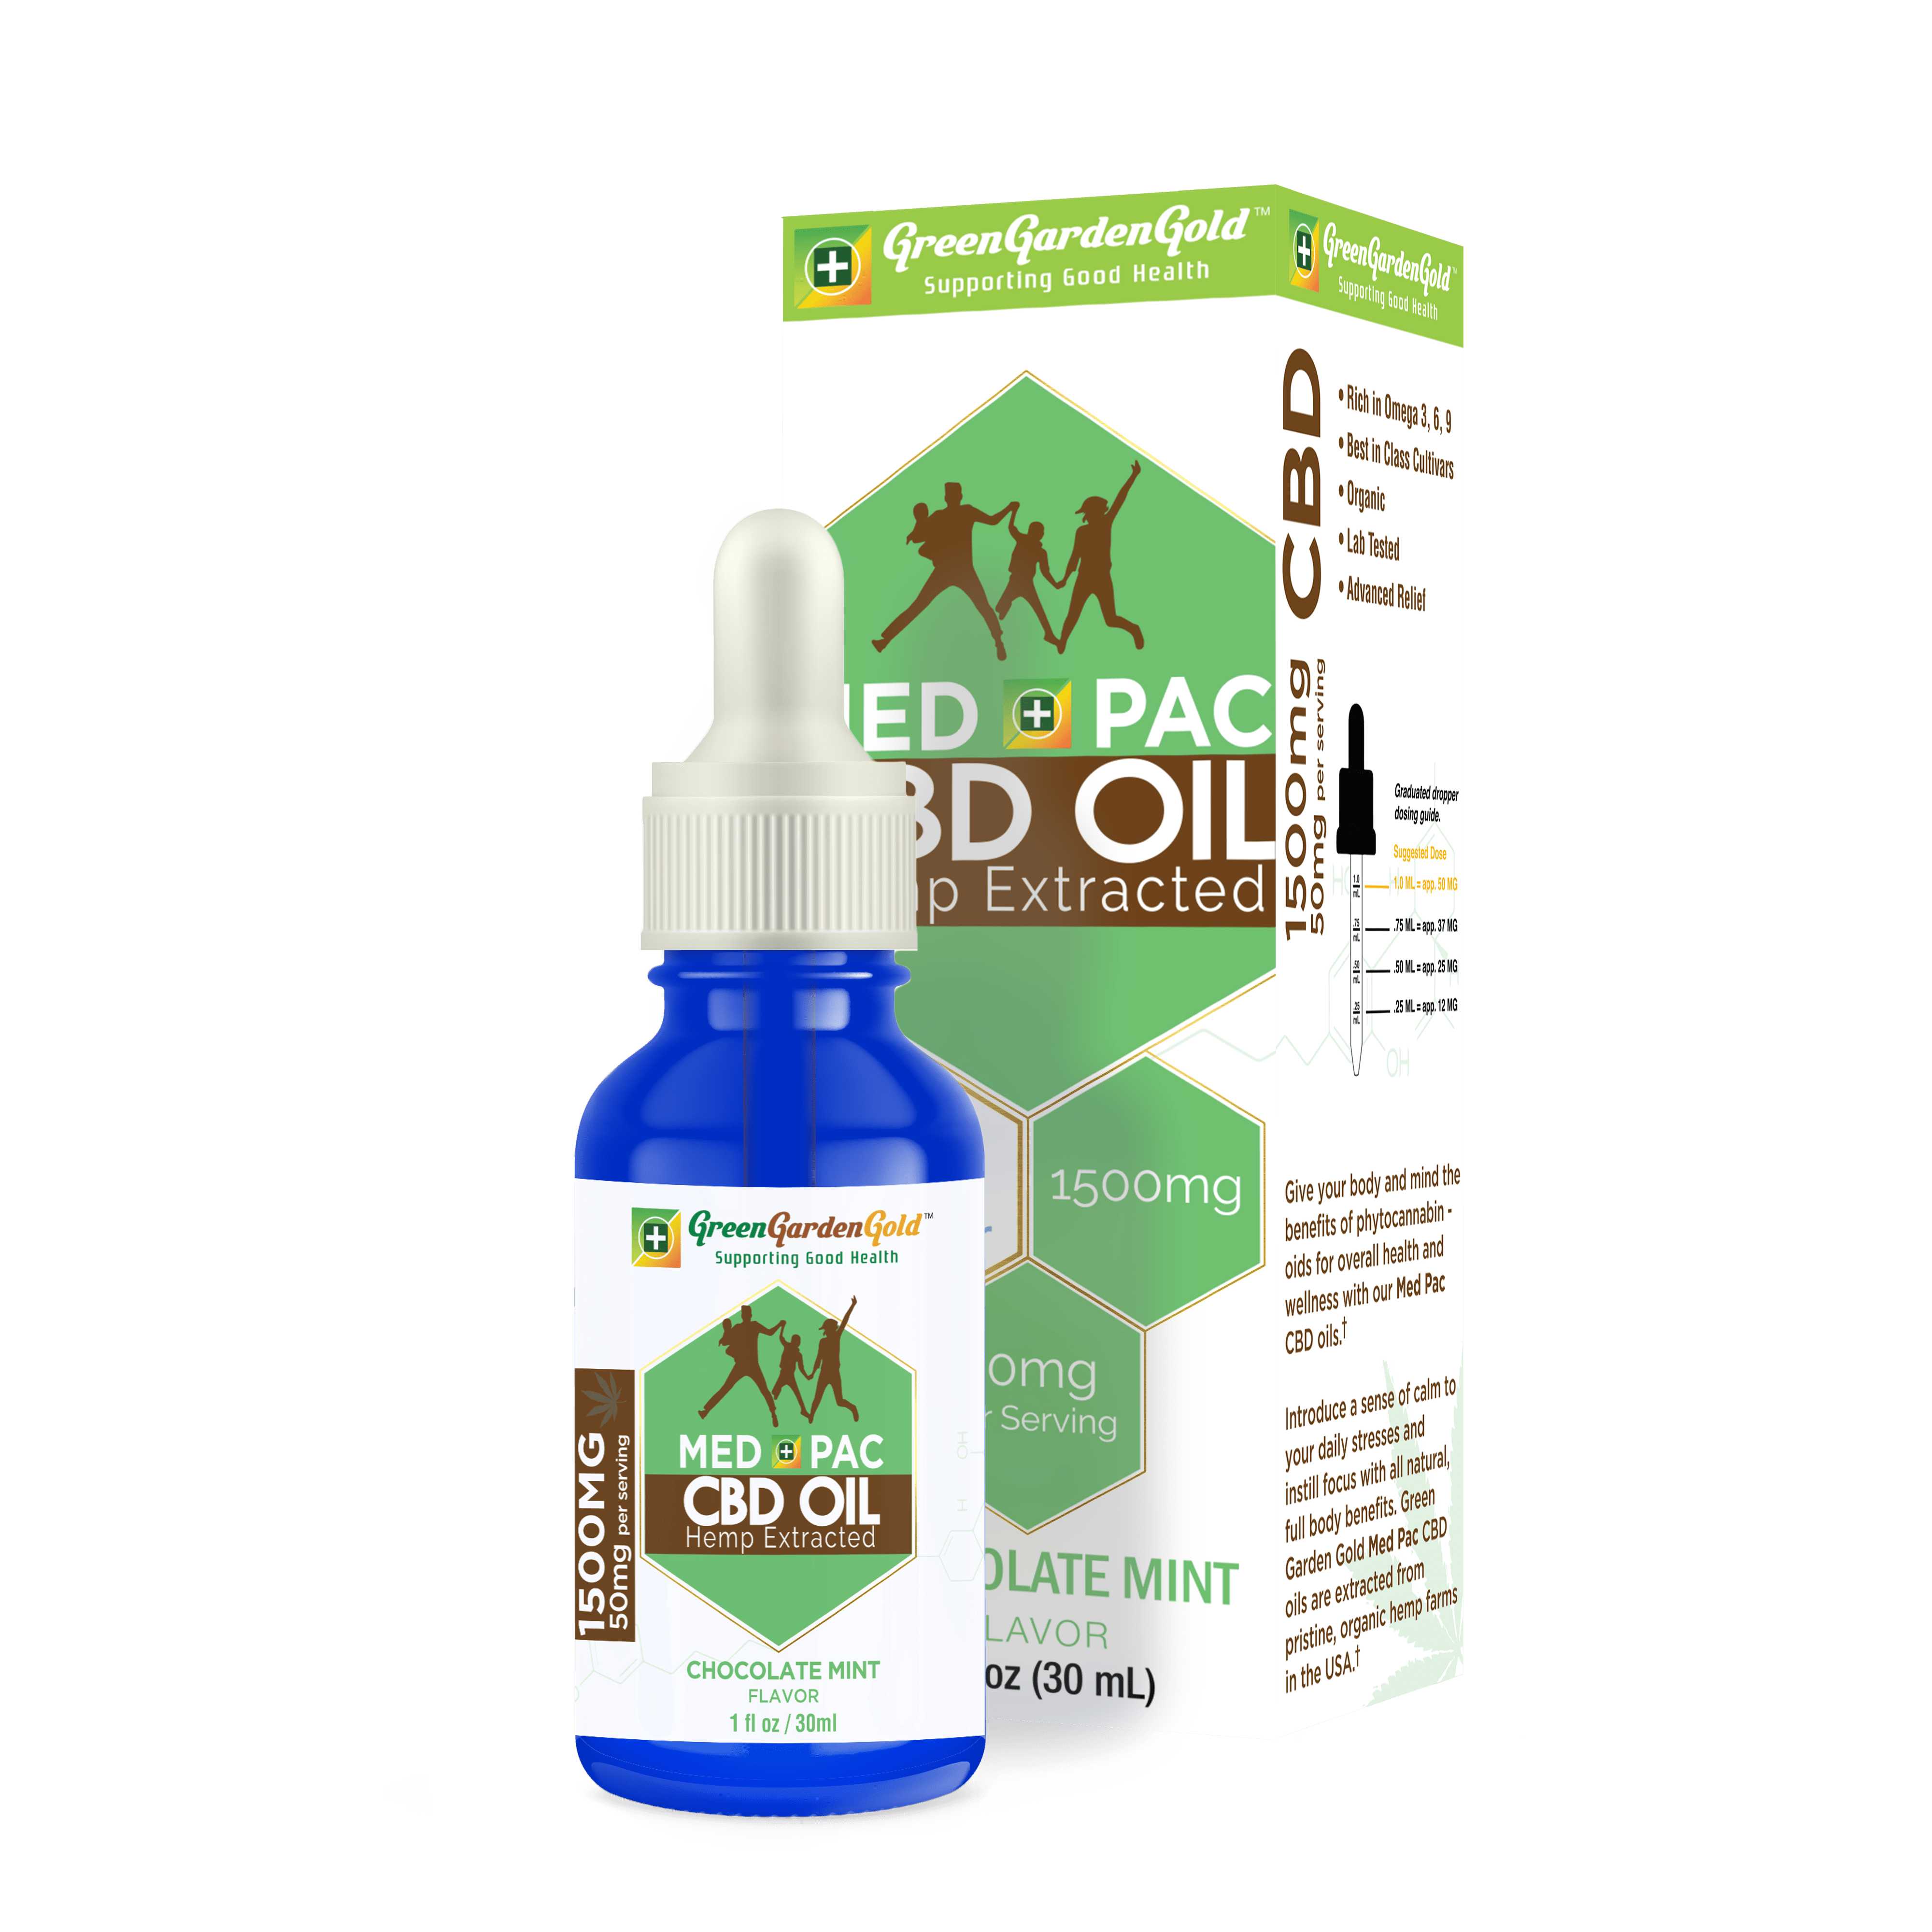 1,500mg Med Pac CBD Oil, 30ml Bottle, Chocolate Mint Flavored, MCT Coconut Oil Blend